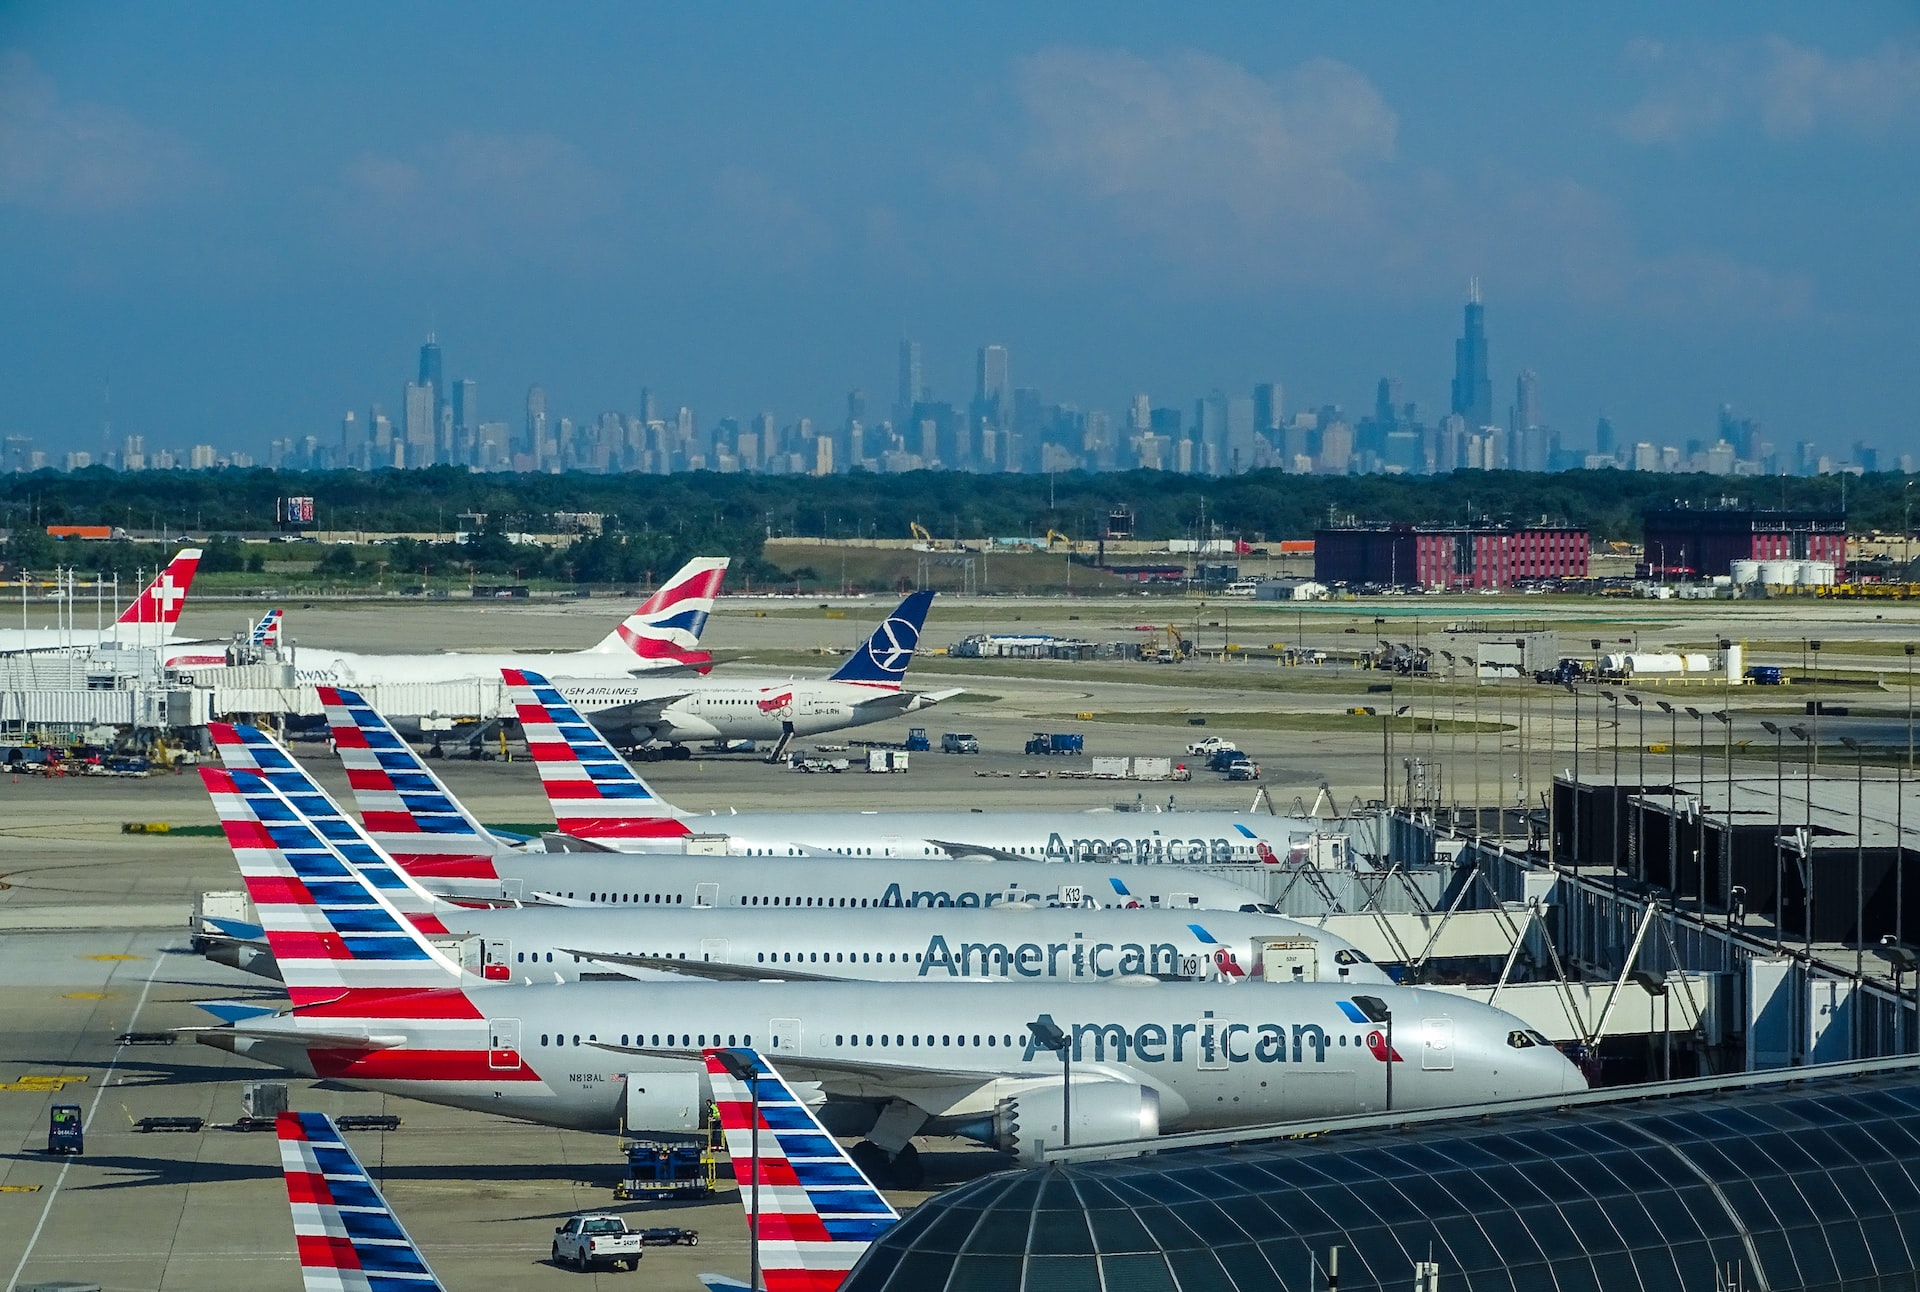 American Airlines aircraft parked at an airport of a large city with skyscrapers.